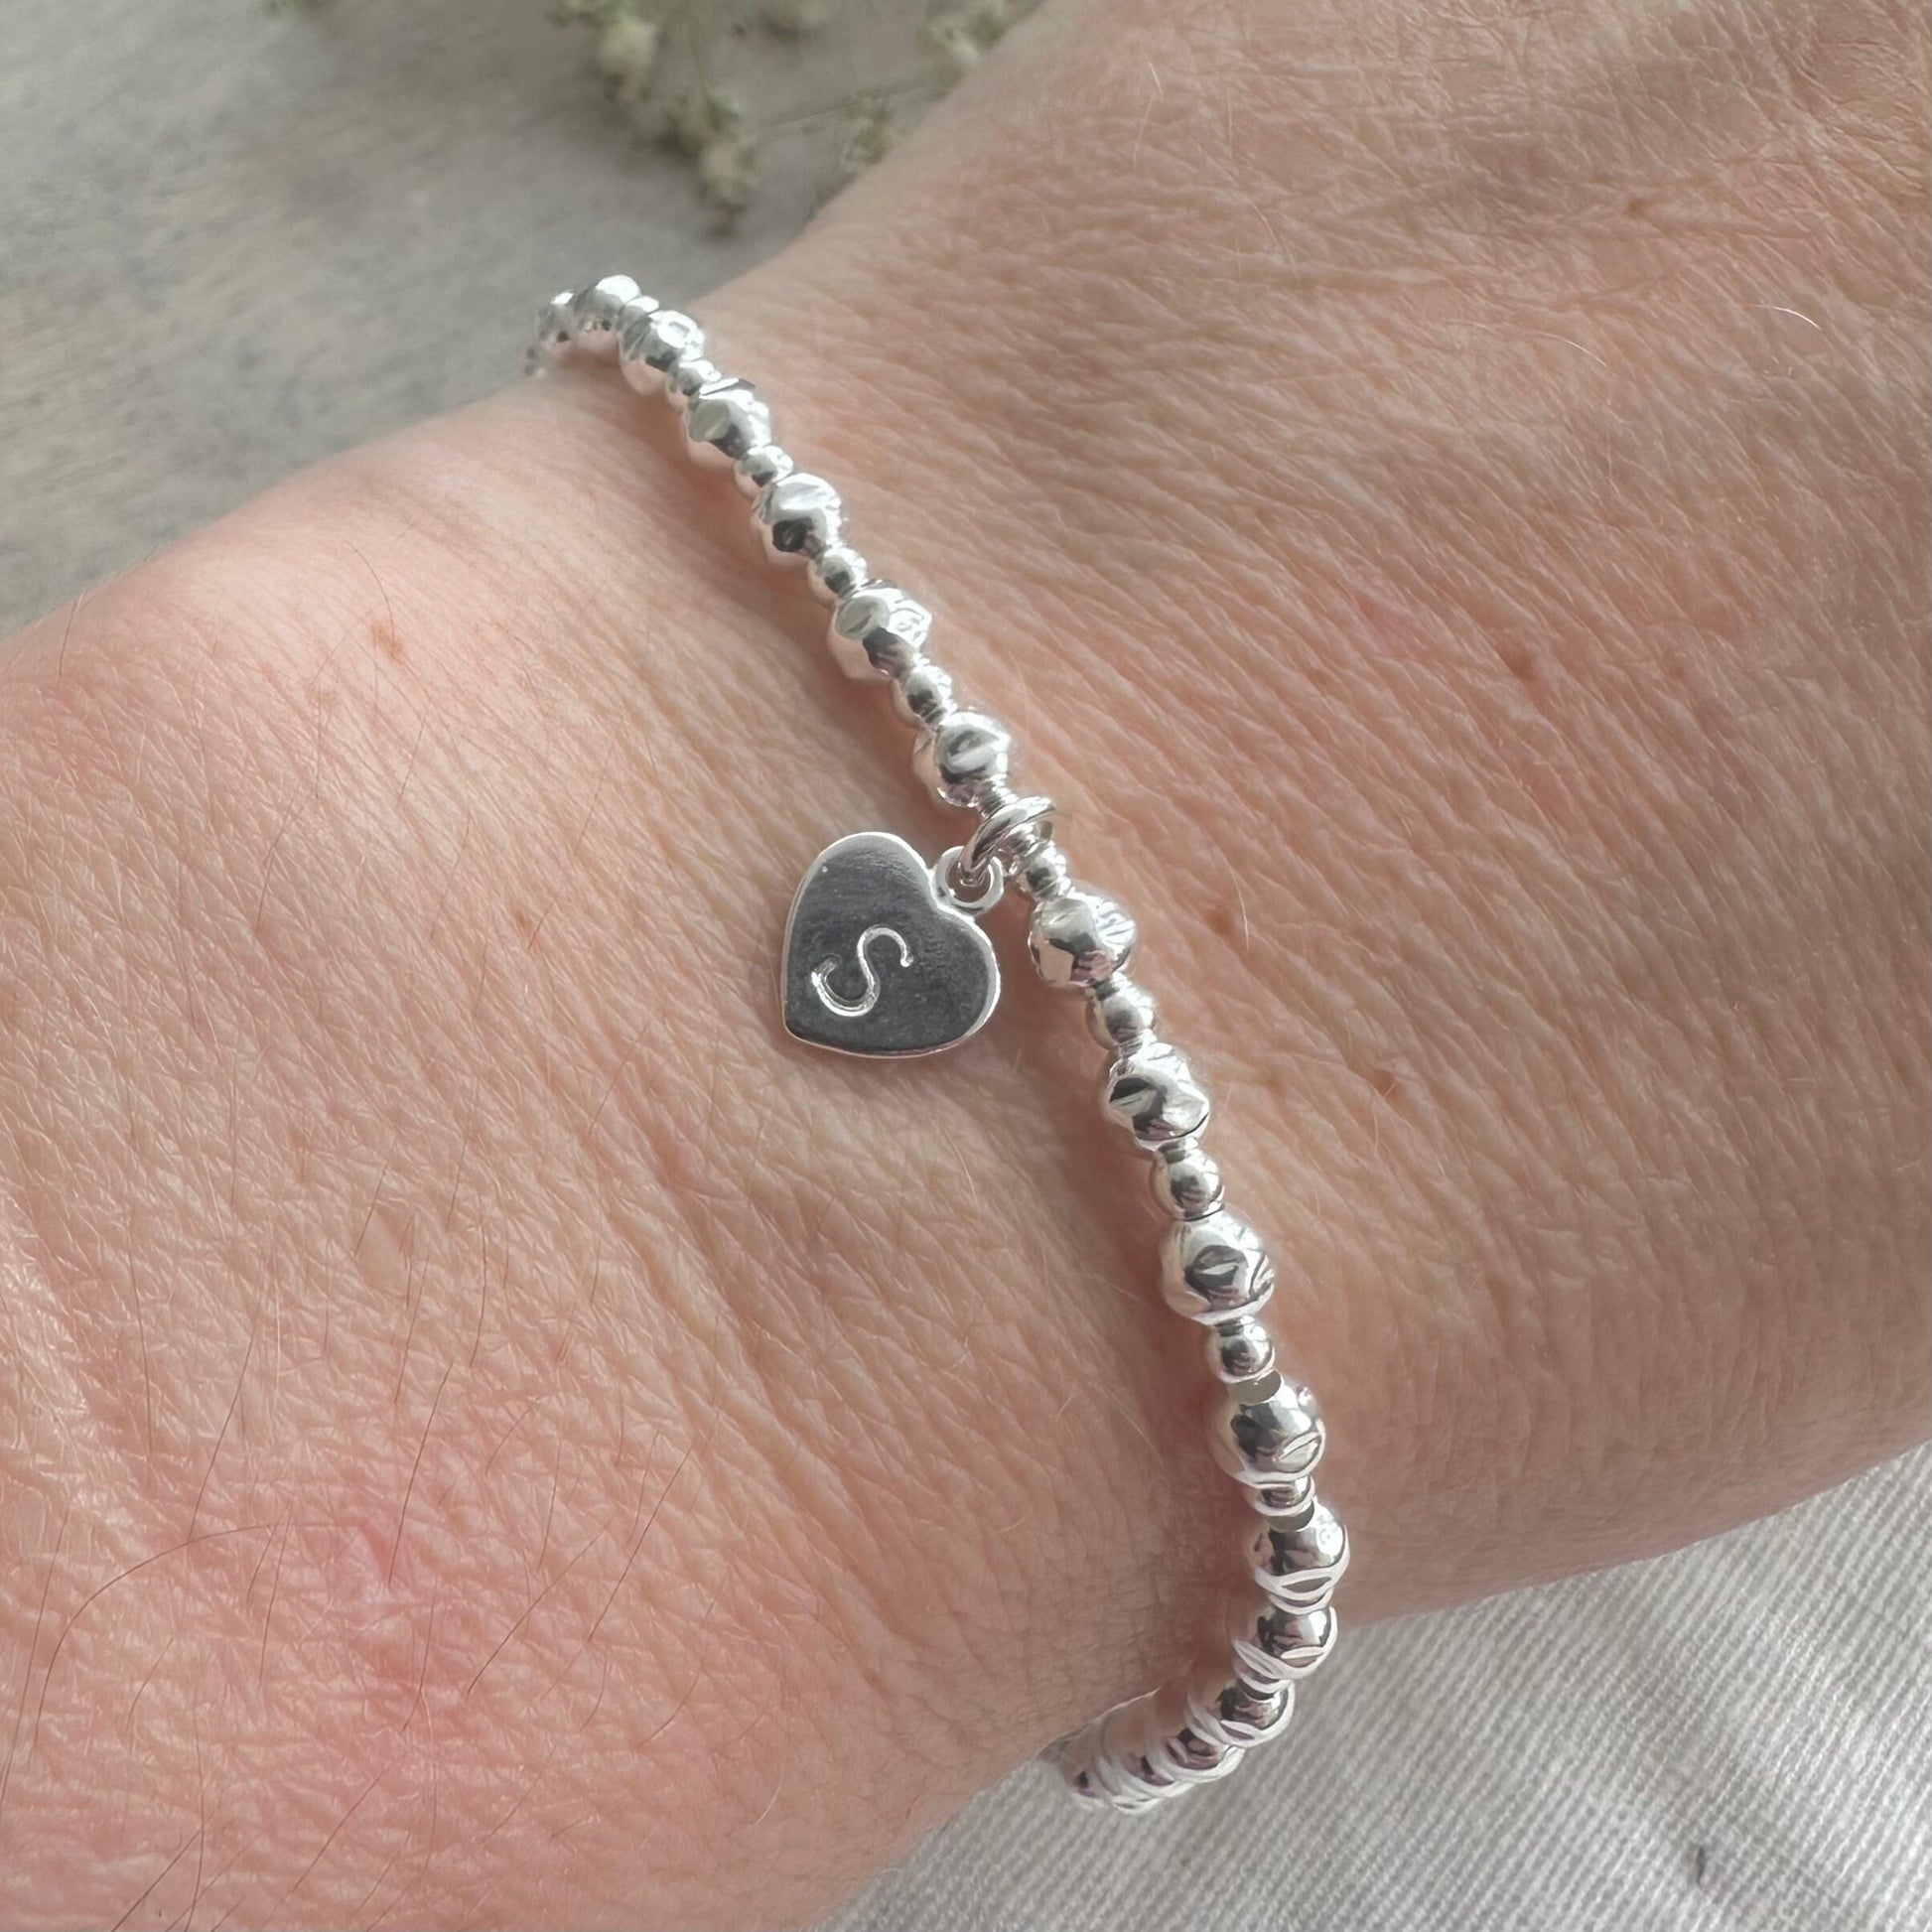 Stretchy Textured Bead Initial Bracelet, Personalised Layering Sterling Silver bracelet with textured beads and letter heart